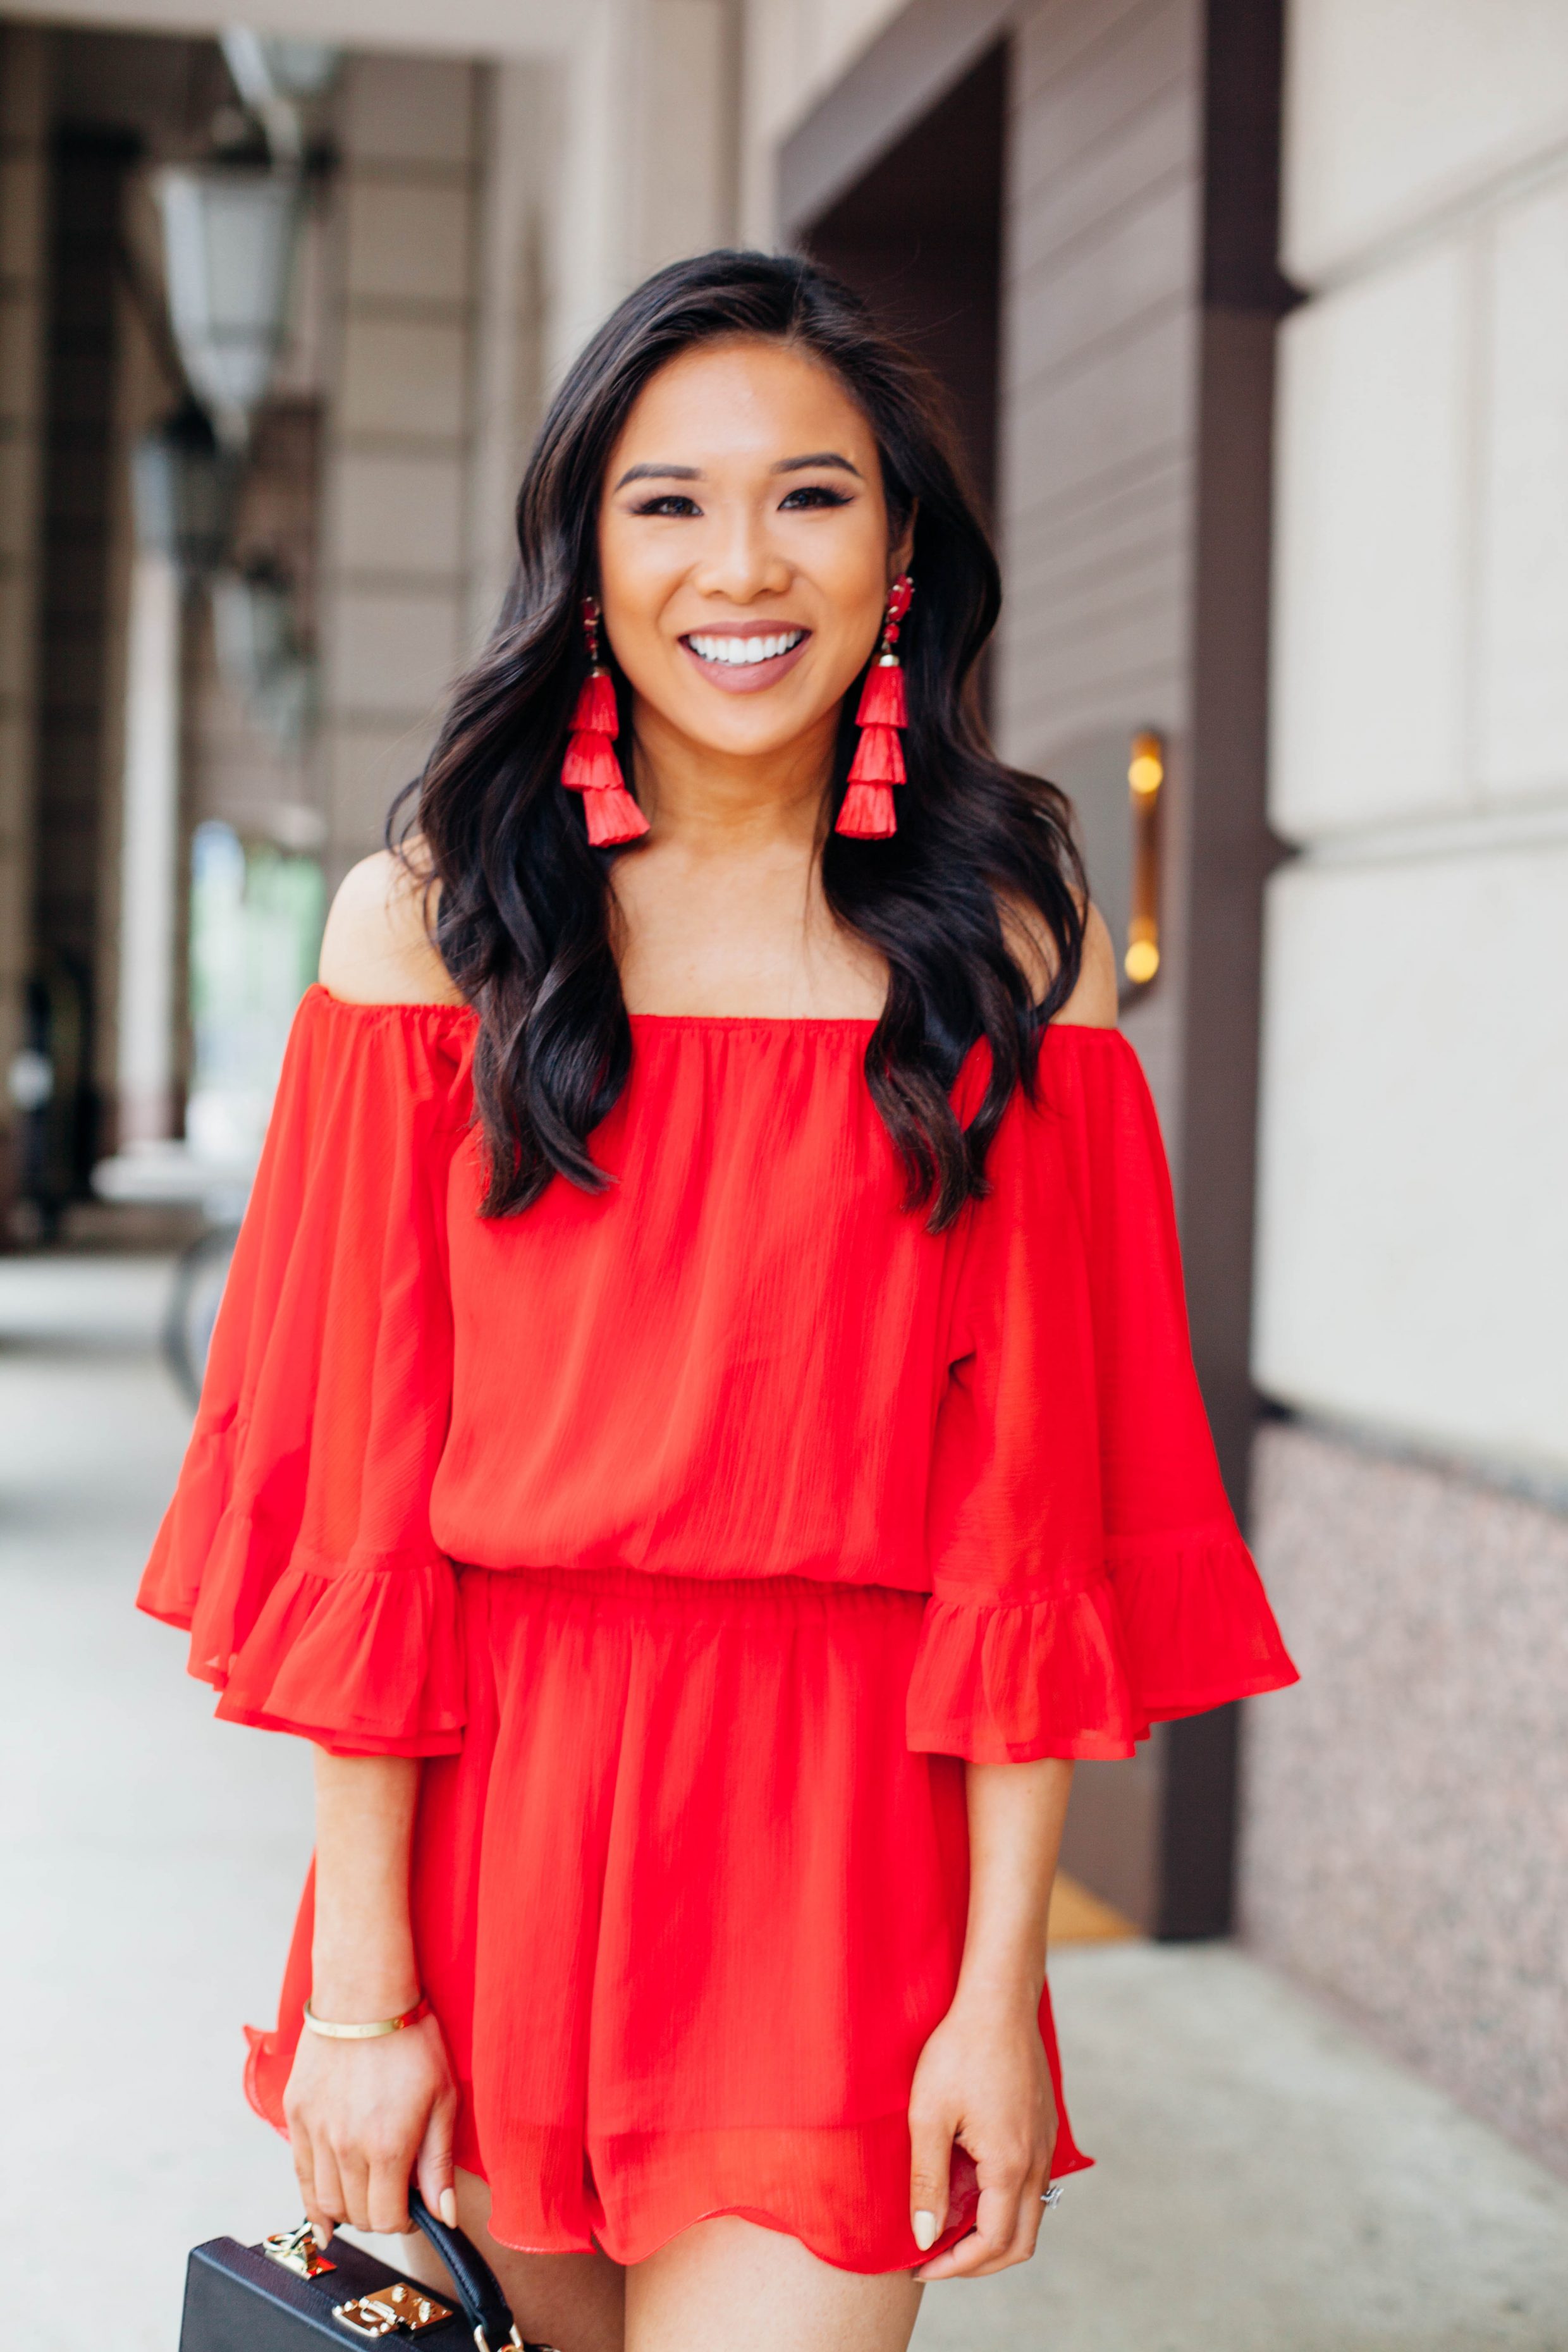 Hoang-Kim wears Kendra Scott Denise tassel earrings with a red off the shoulder romper and black box bag from The Daily Edited